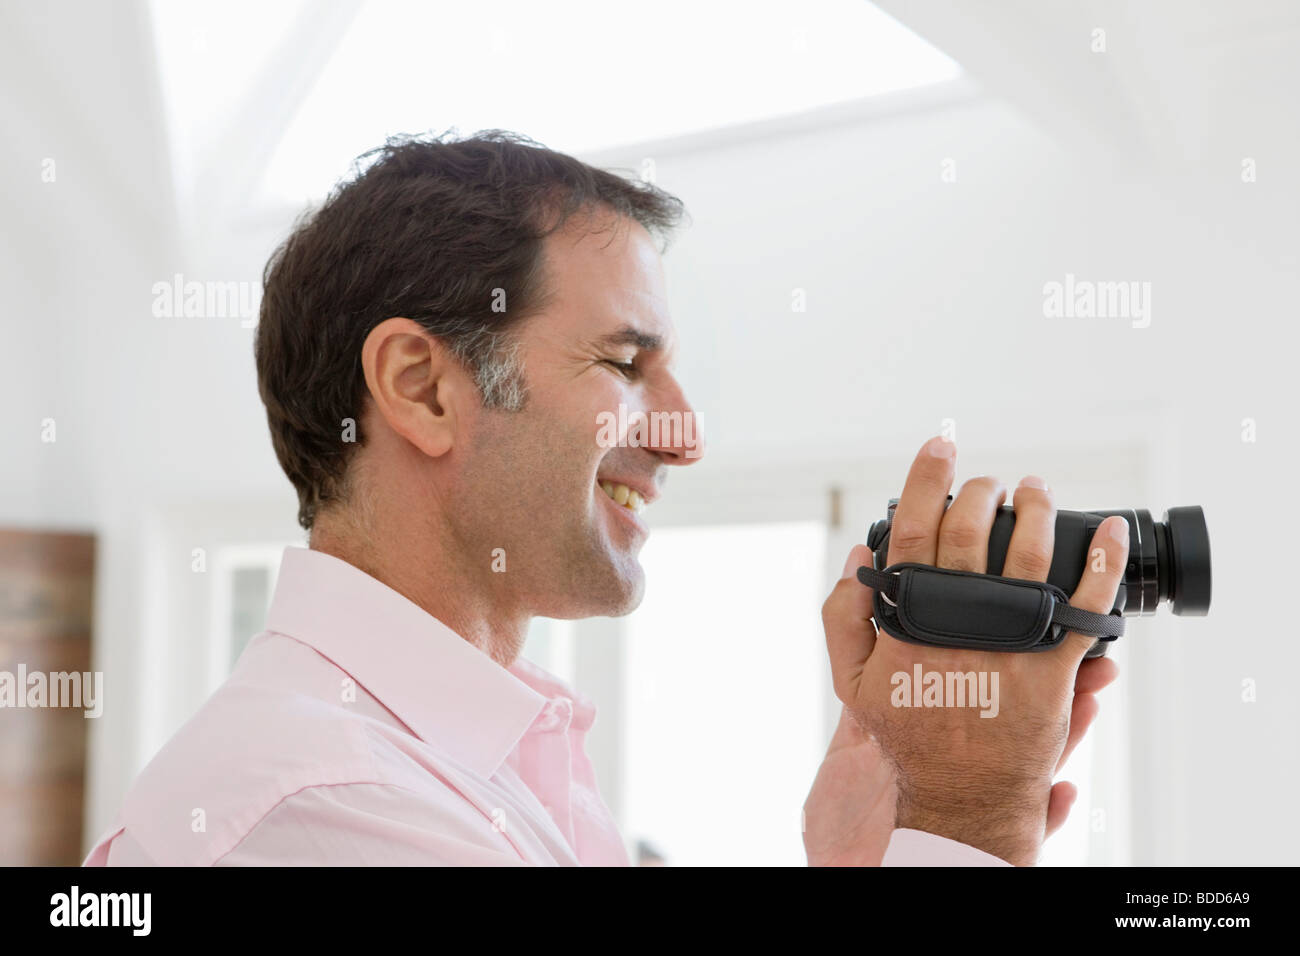 man-holding-a-home-video-camera-and-smiling-BDD6A9.jpg